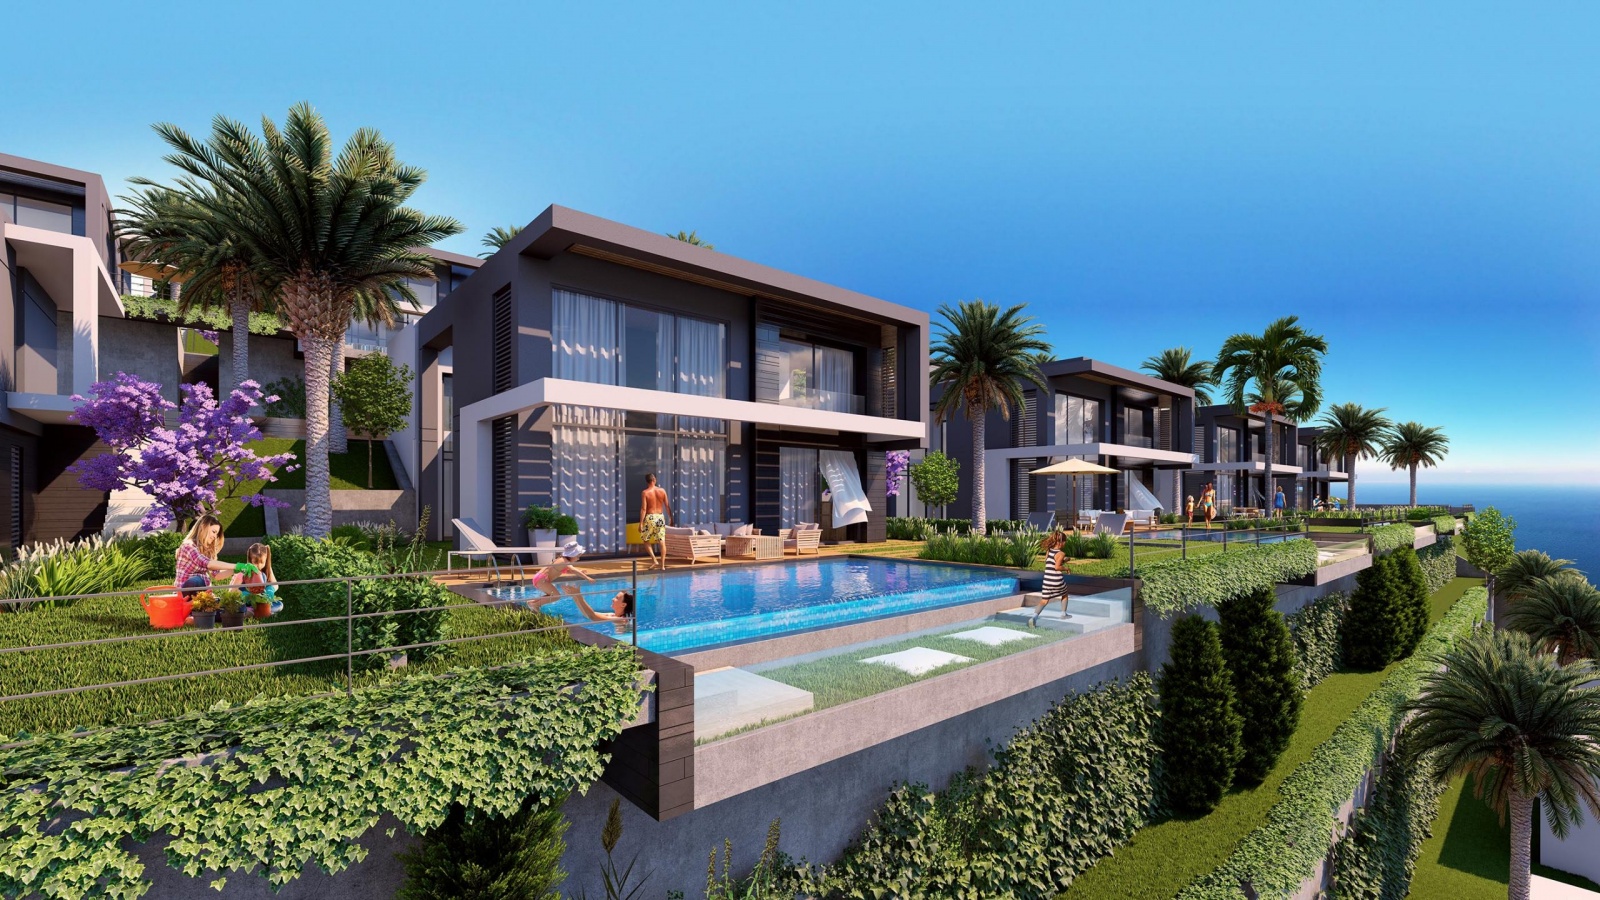 Duplex Luxury Villas With Sea Views Private Pool 5 Bedroom Configurations Available